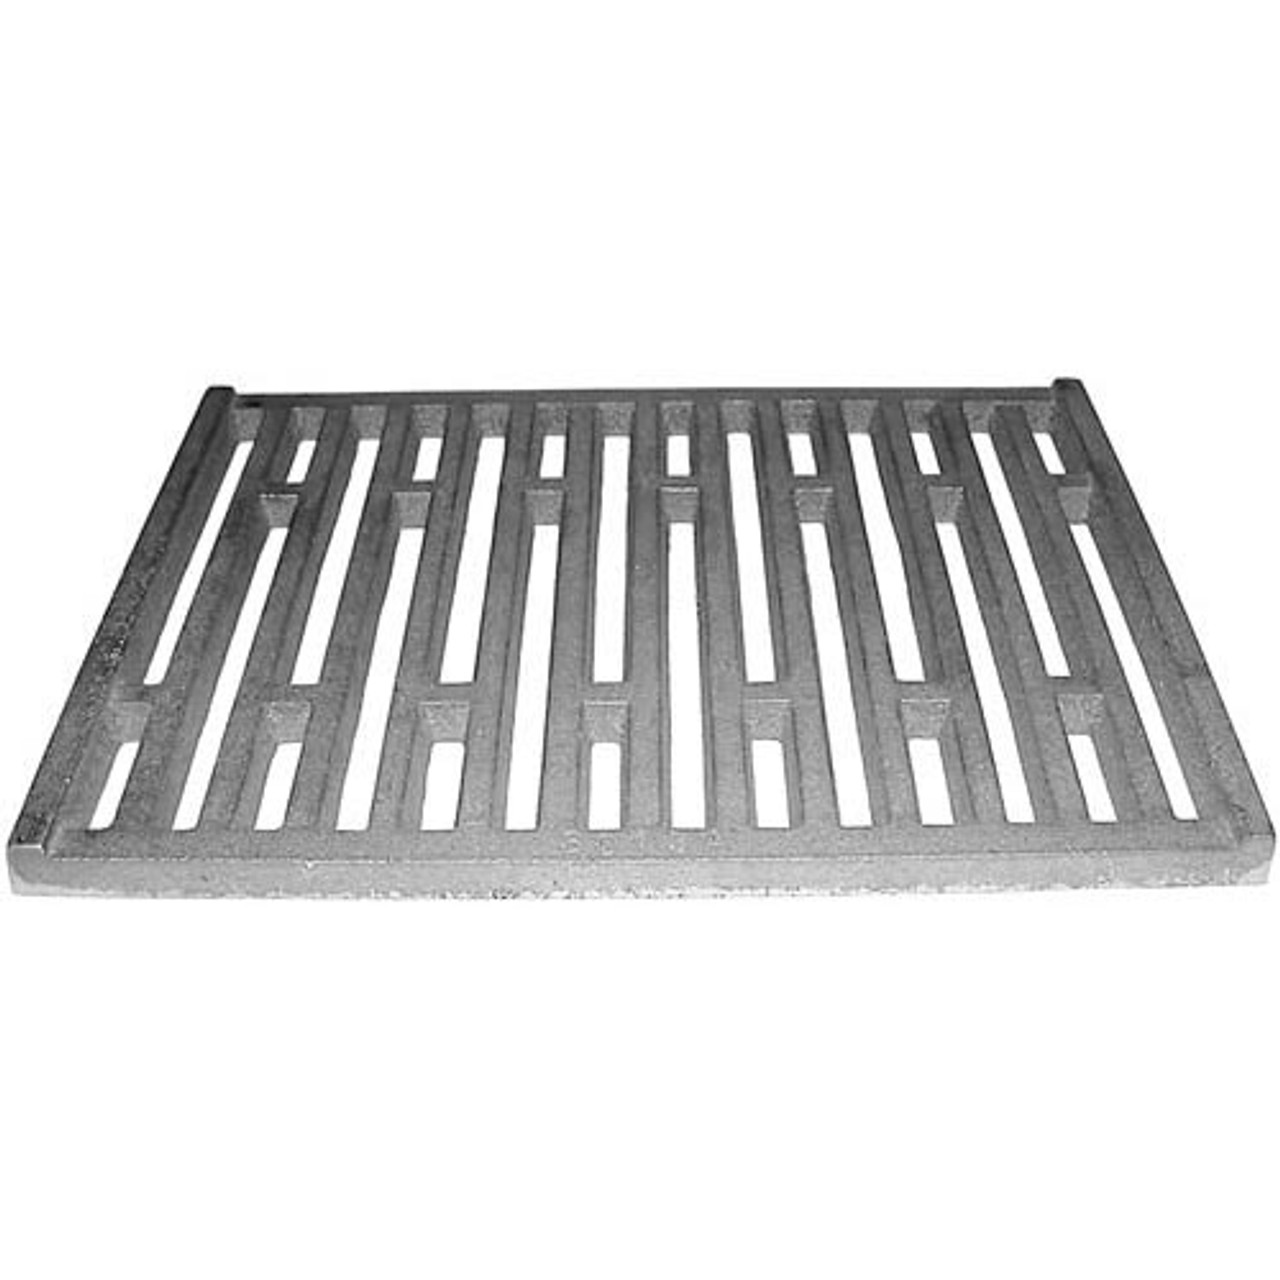 Grate 11-3/4 X 8-1/2 - Replacement Part For Cecilware GMS013F